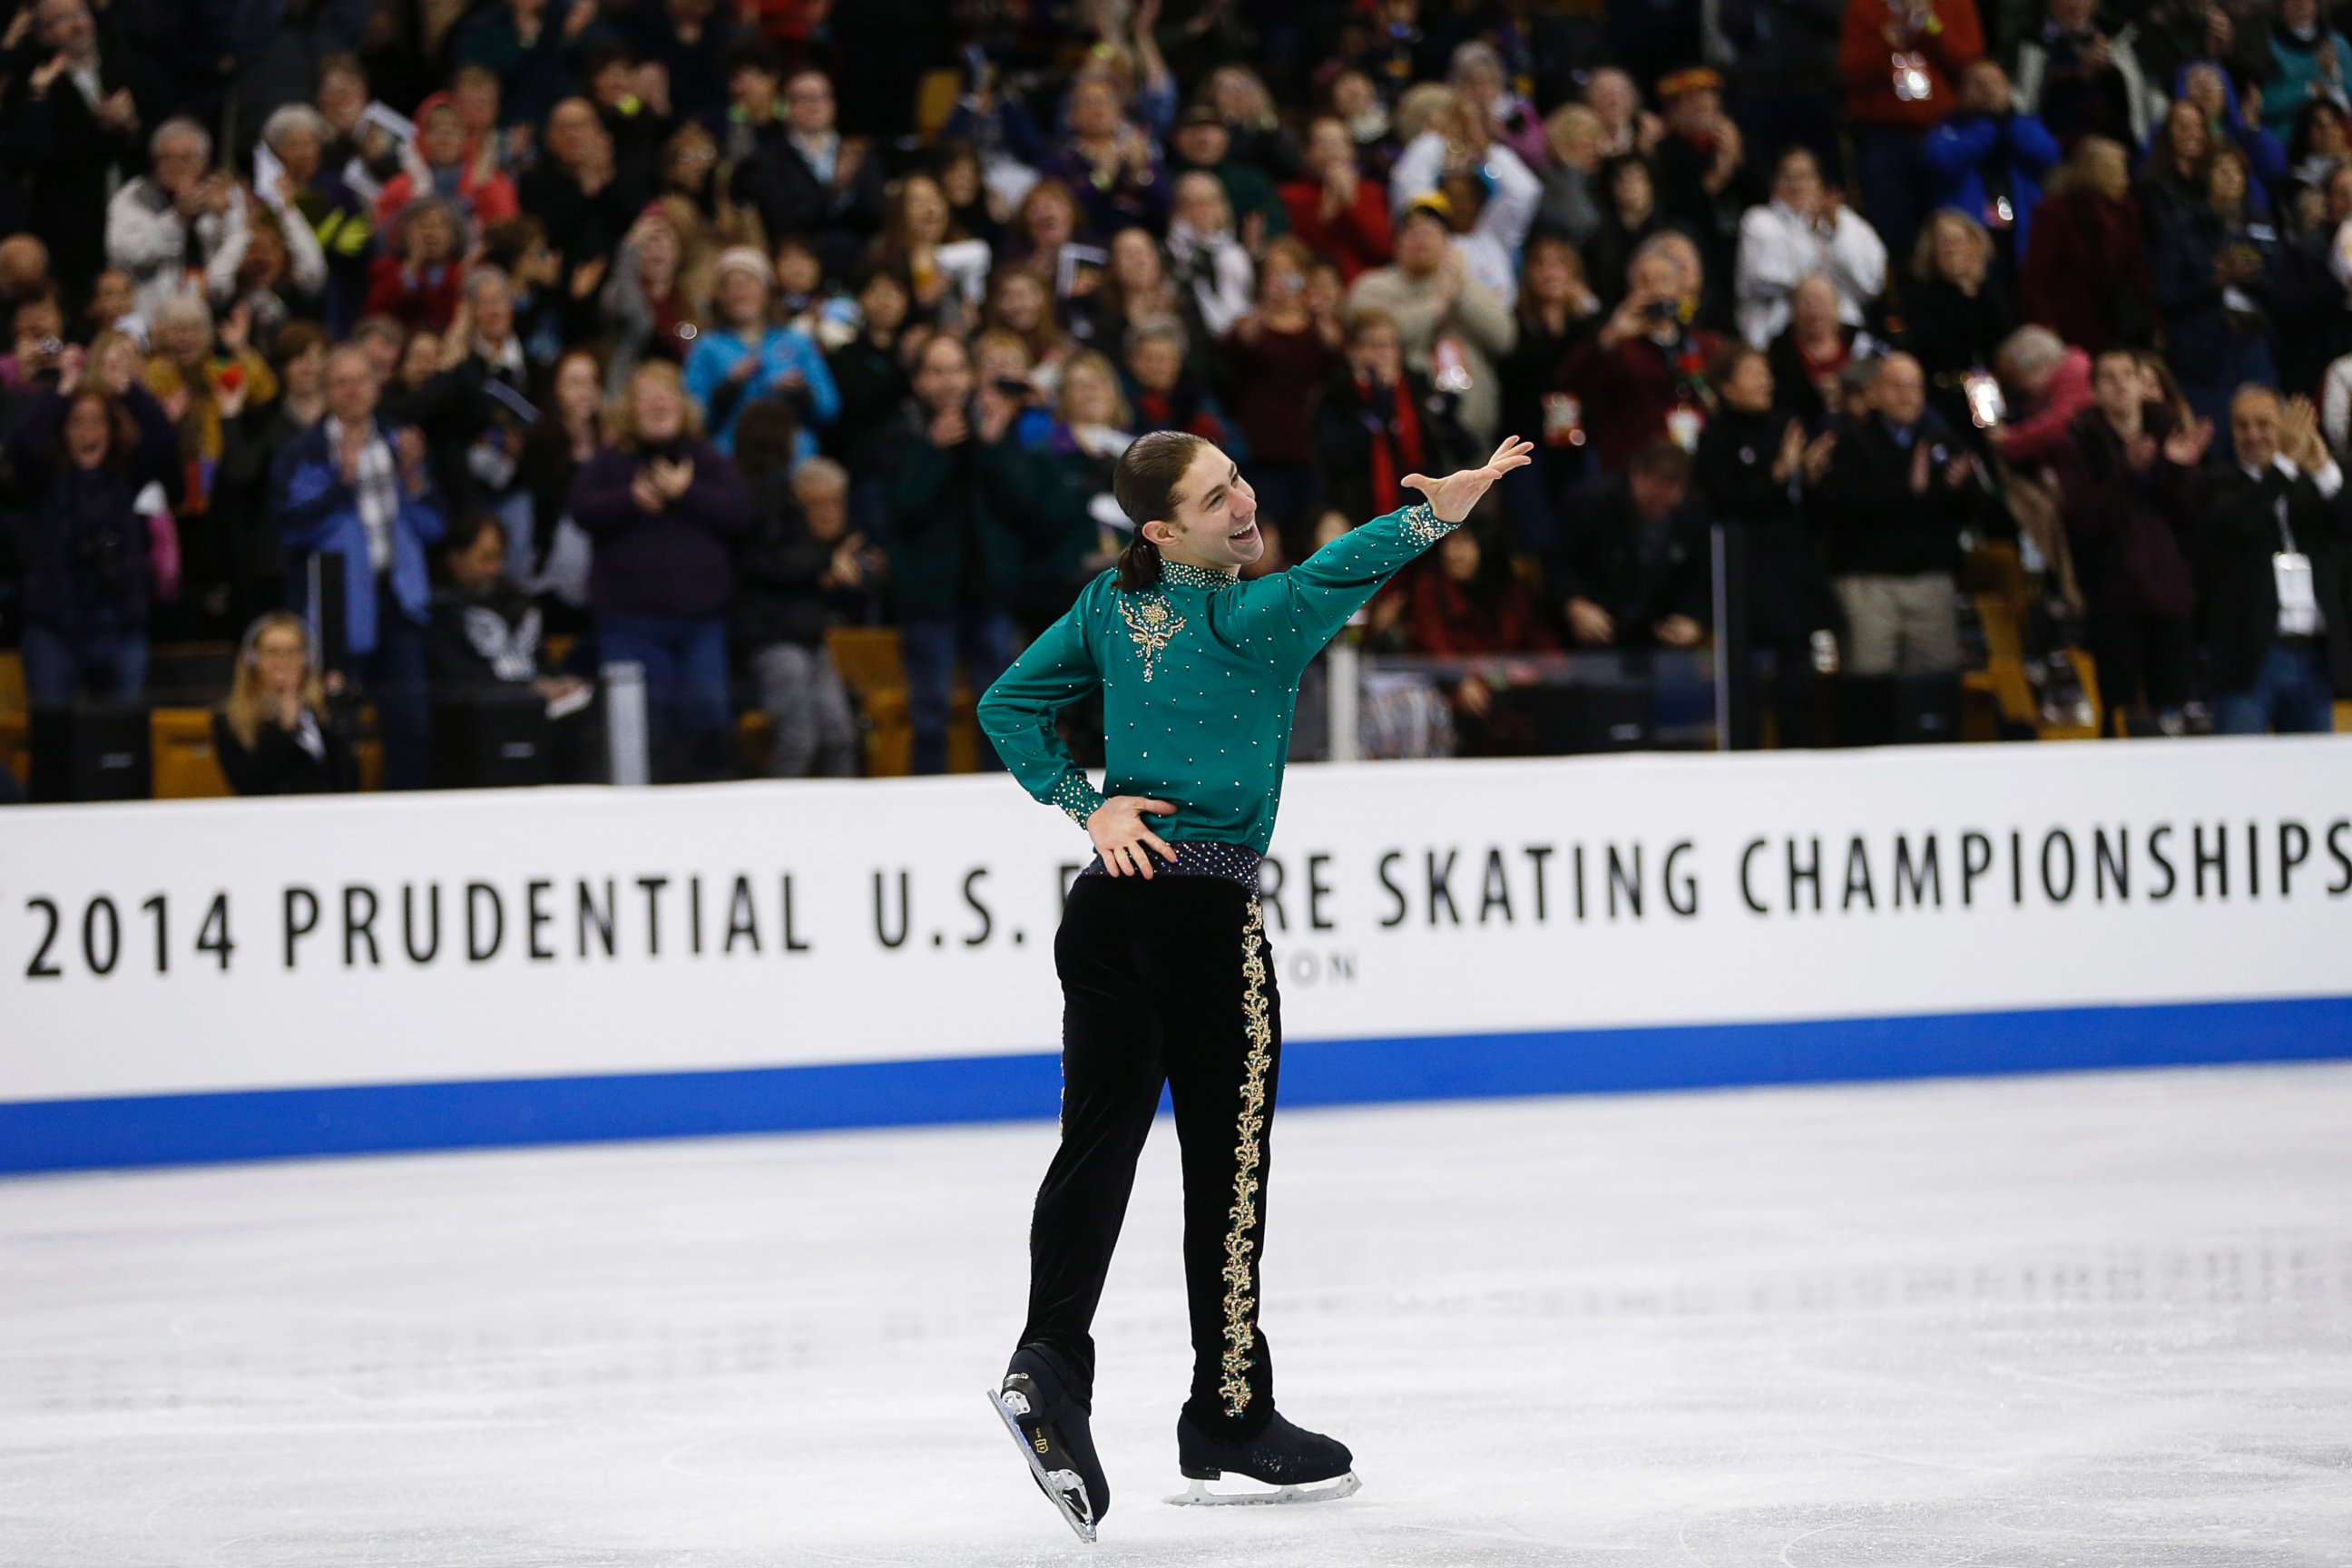 PHOTO: Jason Brown reacted after skating in Group 4. The men's free skate of the 2014 Prudential U.S. Figure Skating Championships took place at the TD Garden in Boston, Jan. 12, 2014.